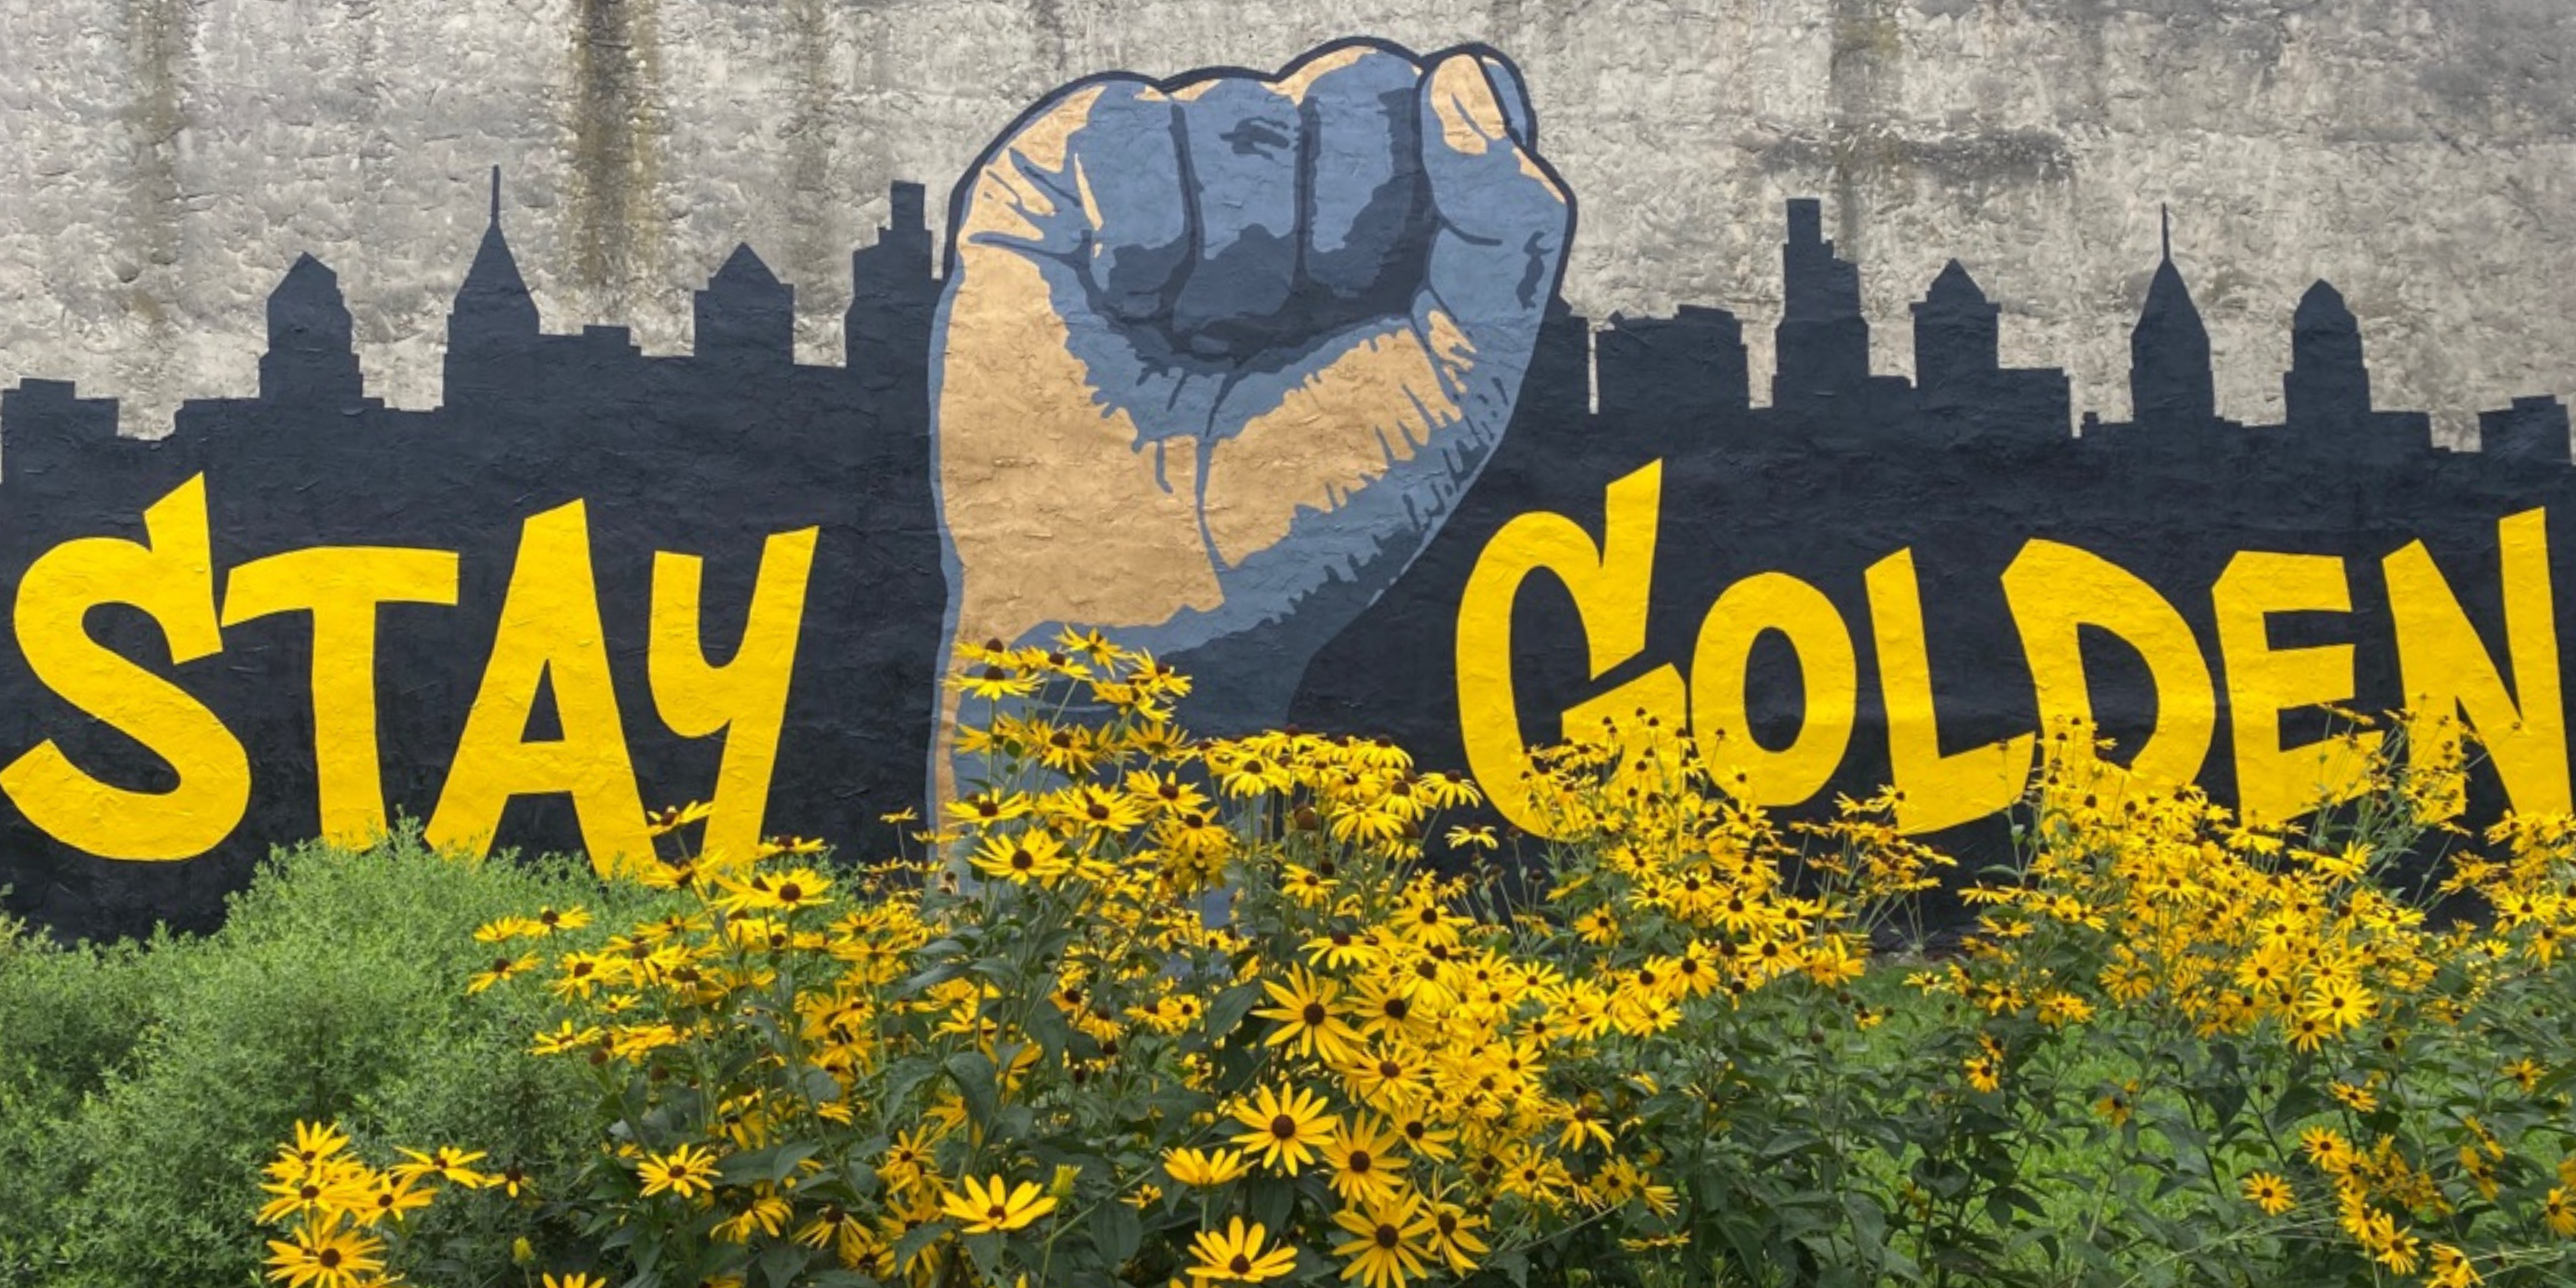 A mural that reads "stay golden" with native plants underneath.